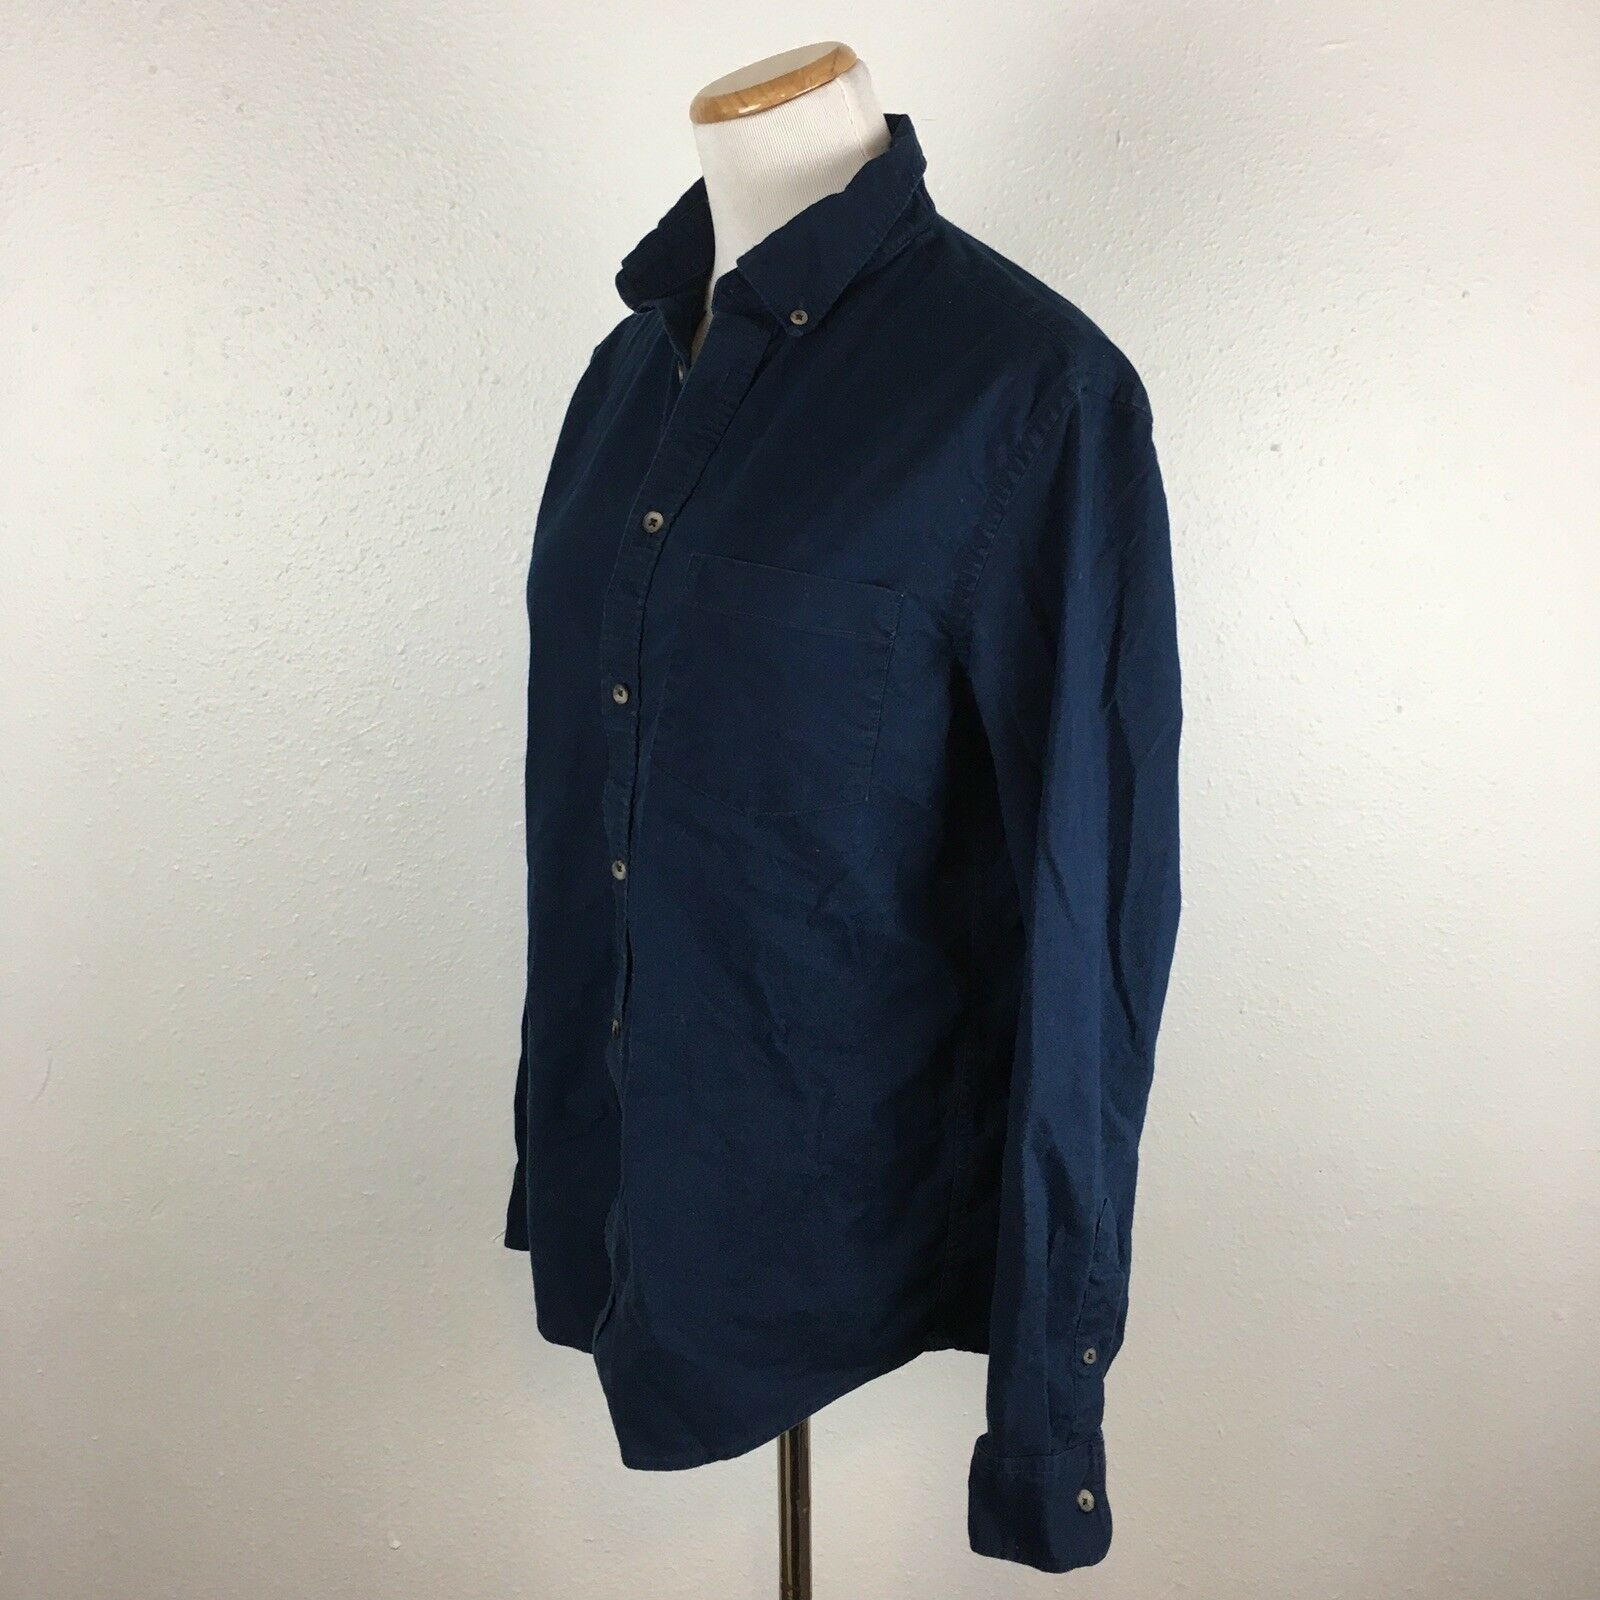 Old Navy Women's The Oxford Shirt Navy Blue Slim Fit Button Front Size ...